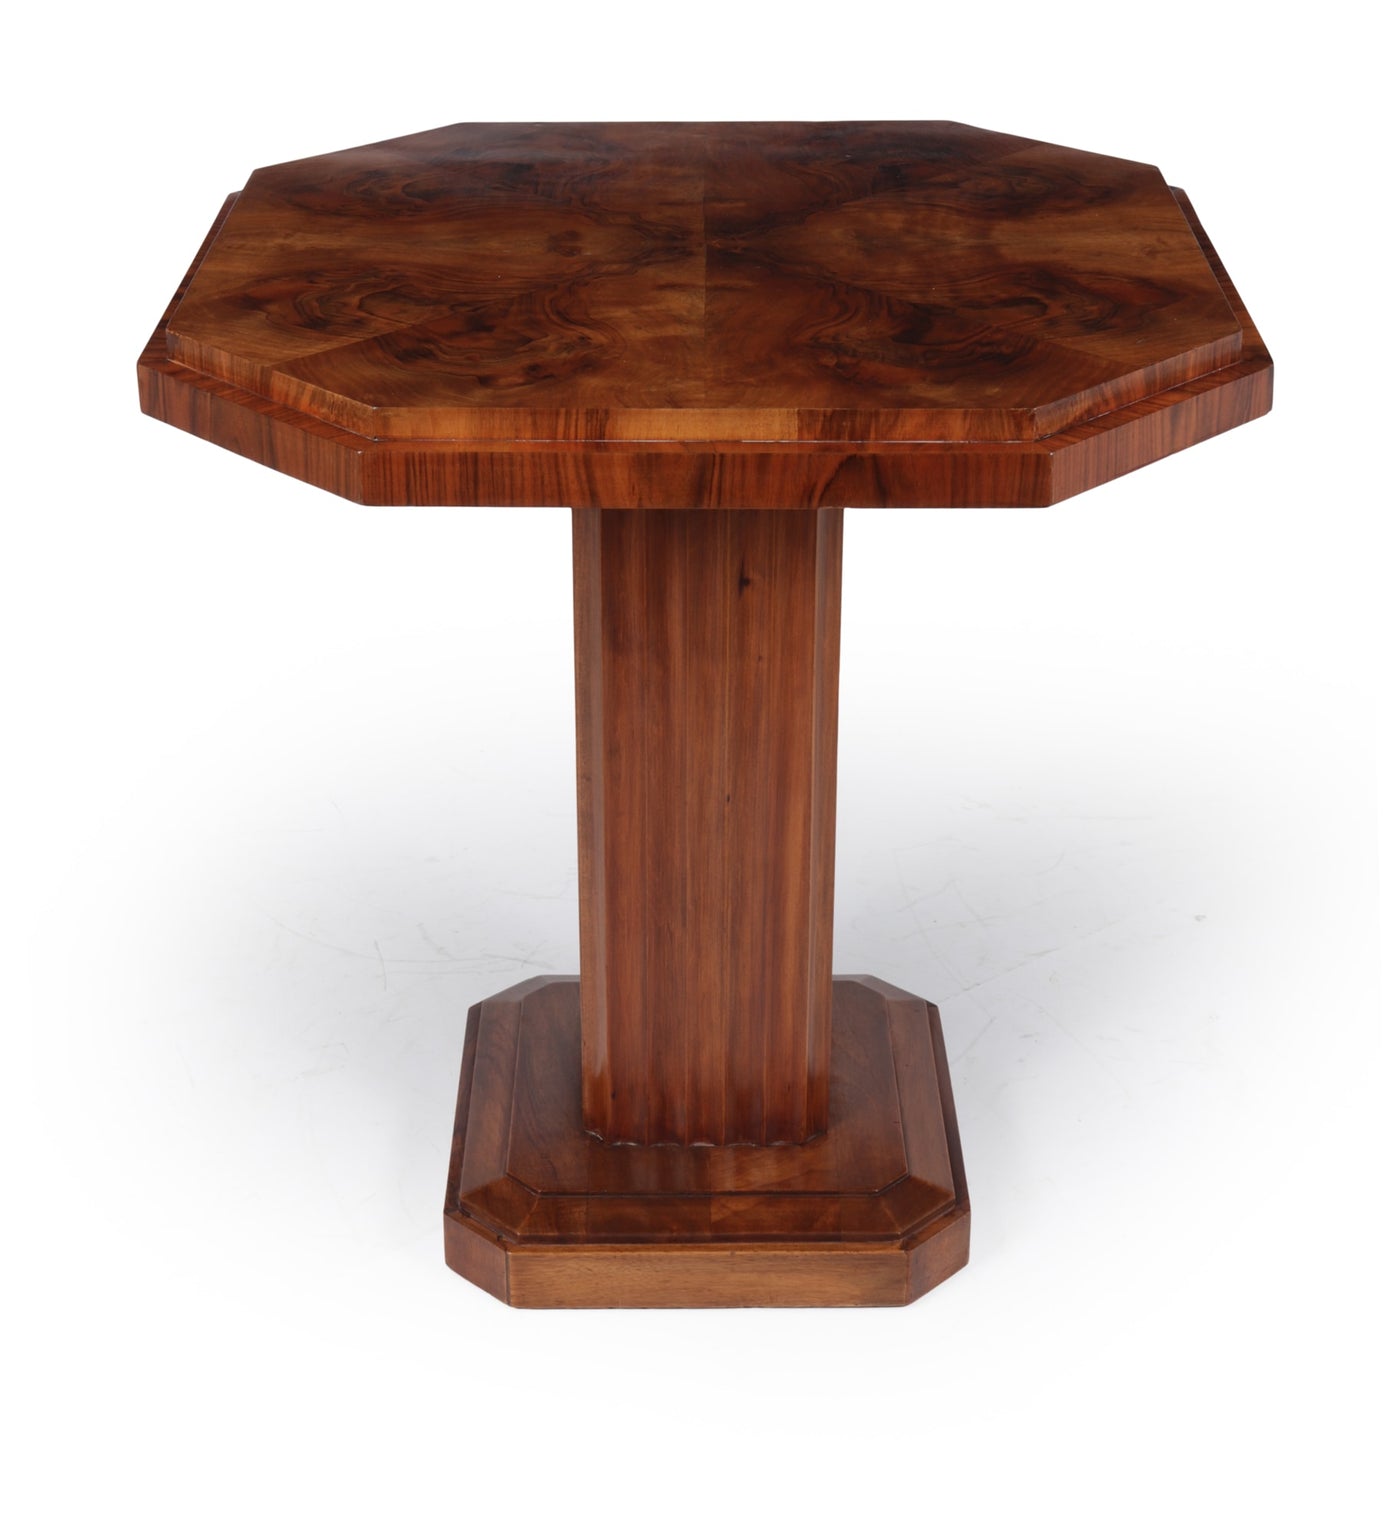 French Art Deco Walnut Wine Table with Fluted Column